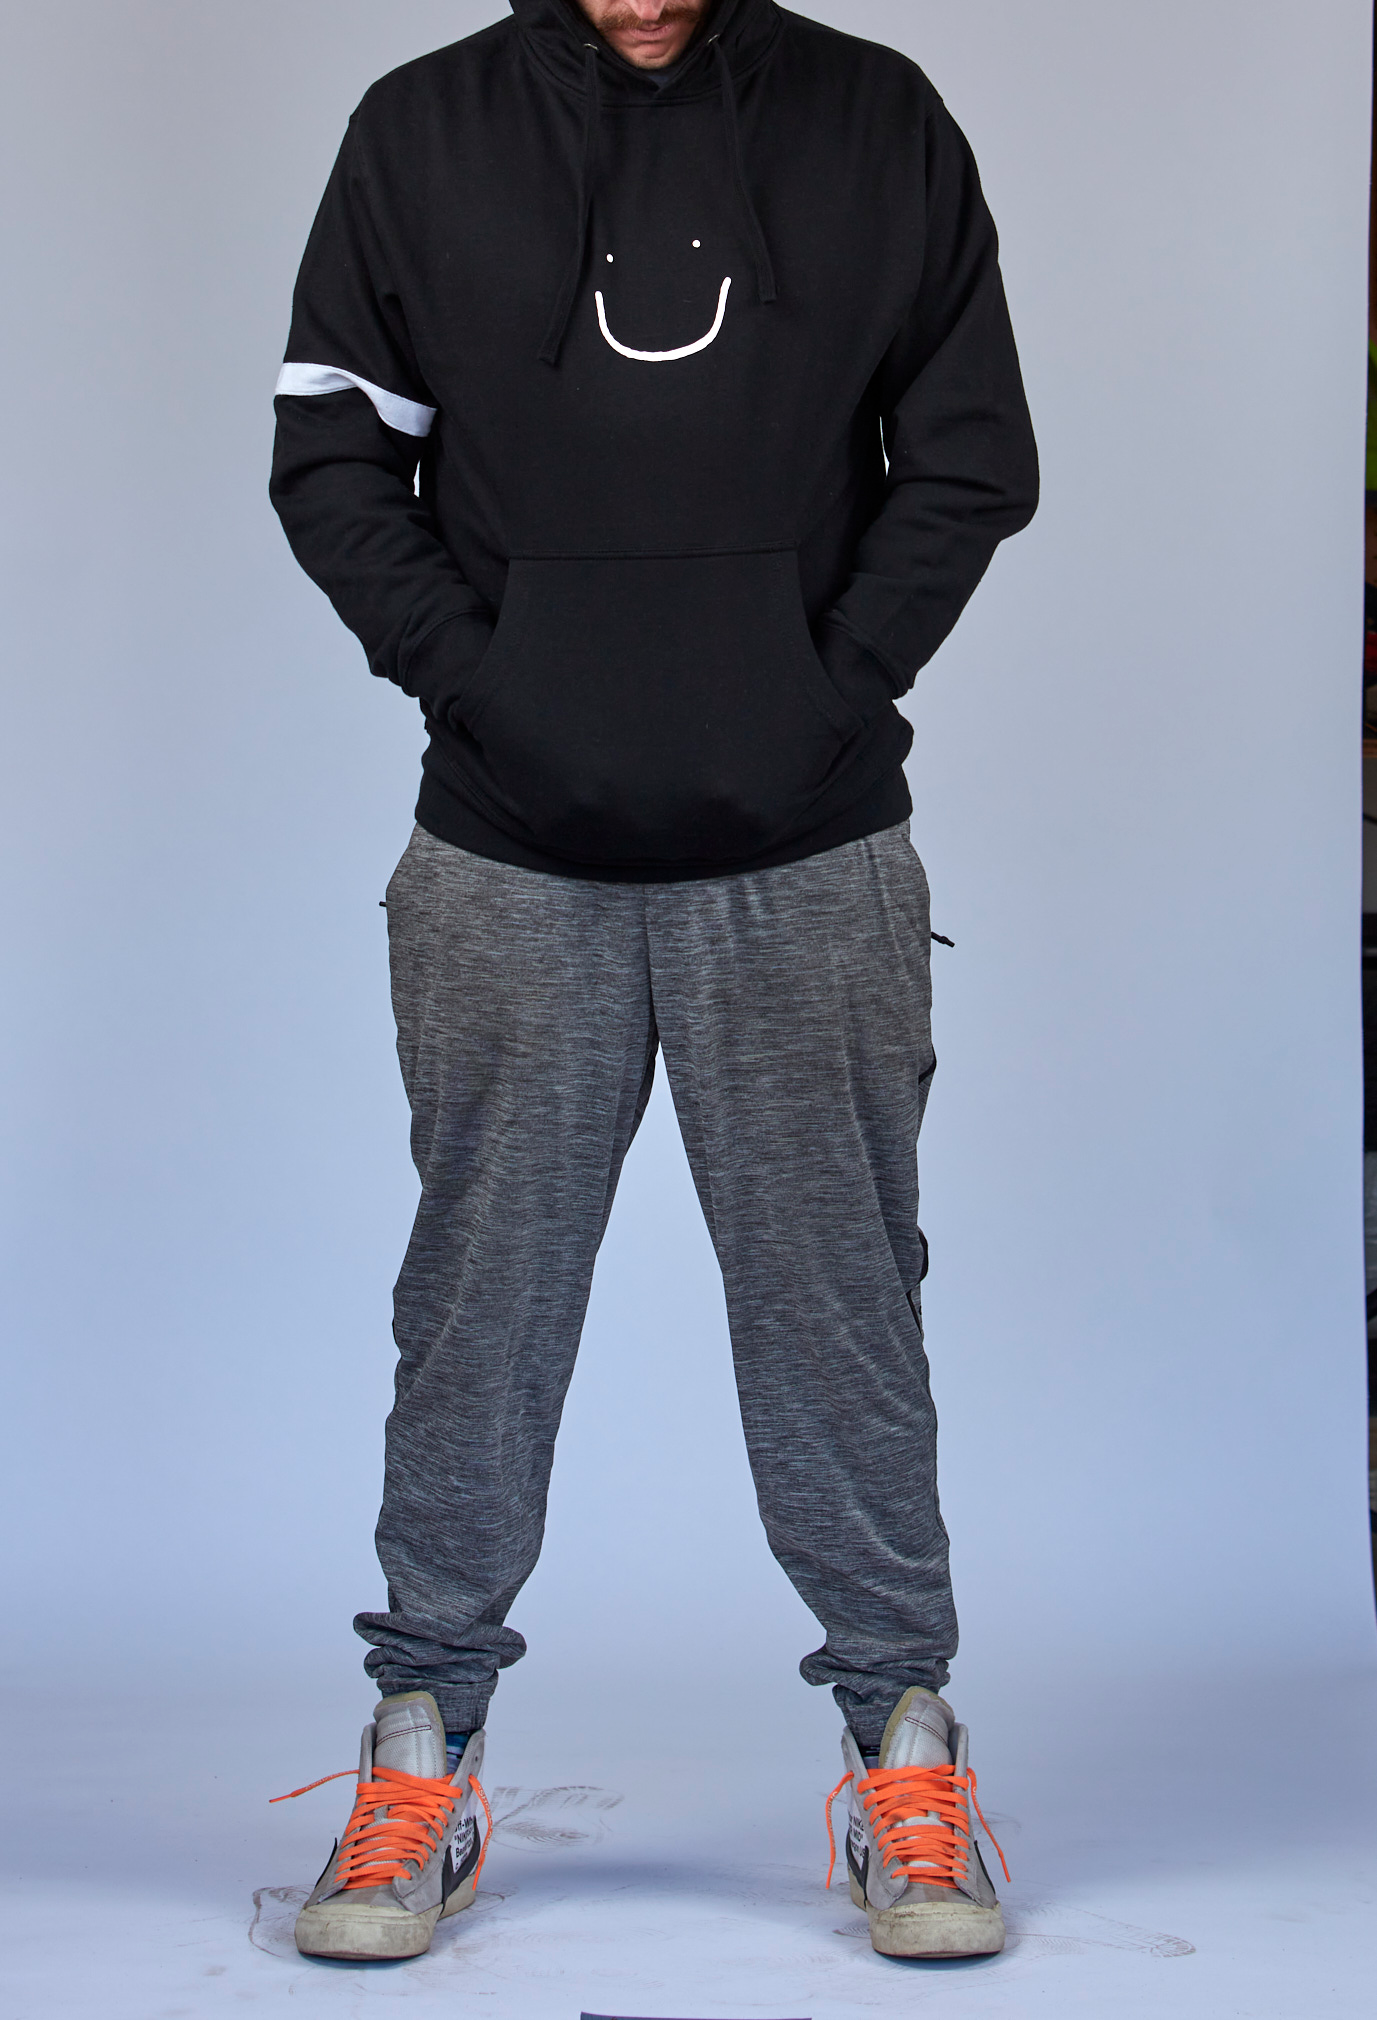 Banded Hoodie - Black - S/XXL Only